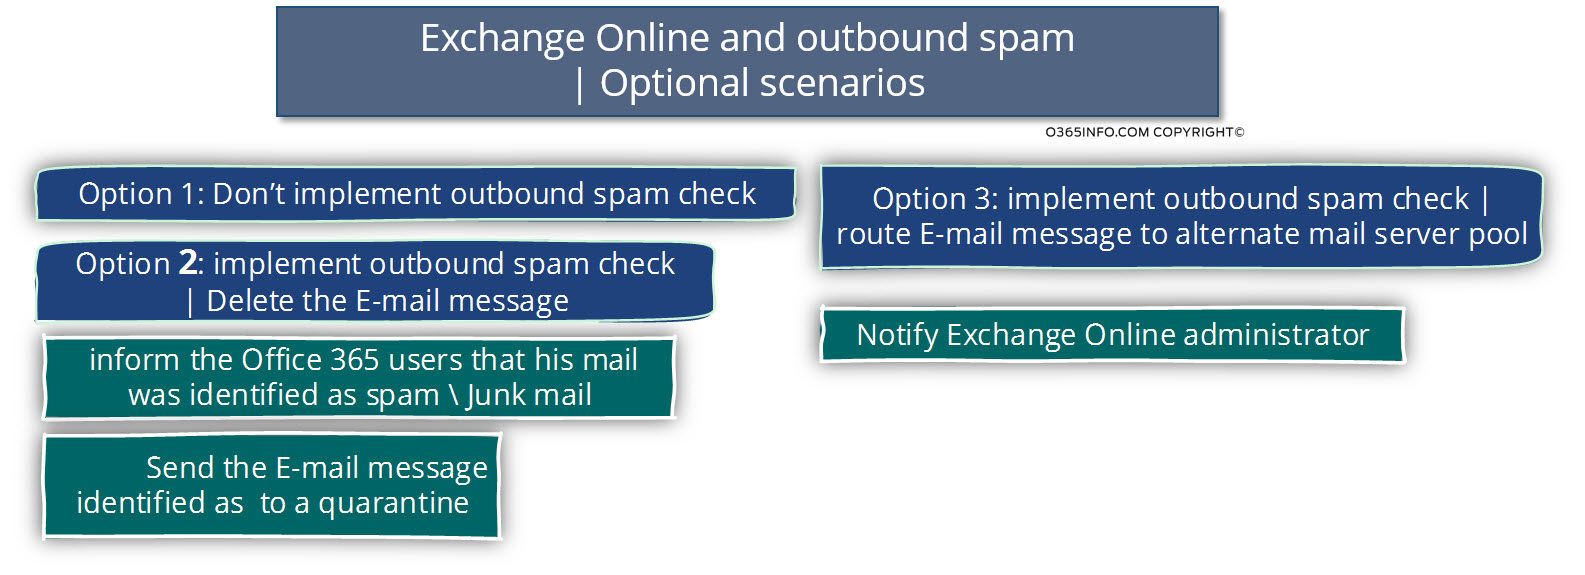 Exchange Online and outbound spam - Optional scenarios